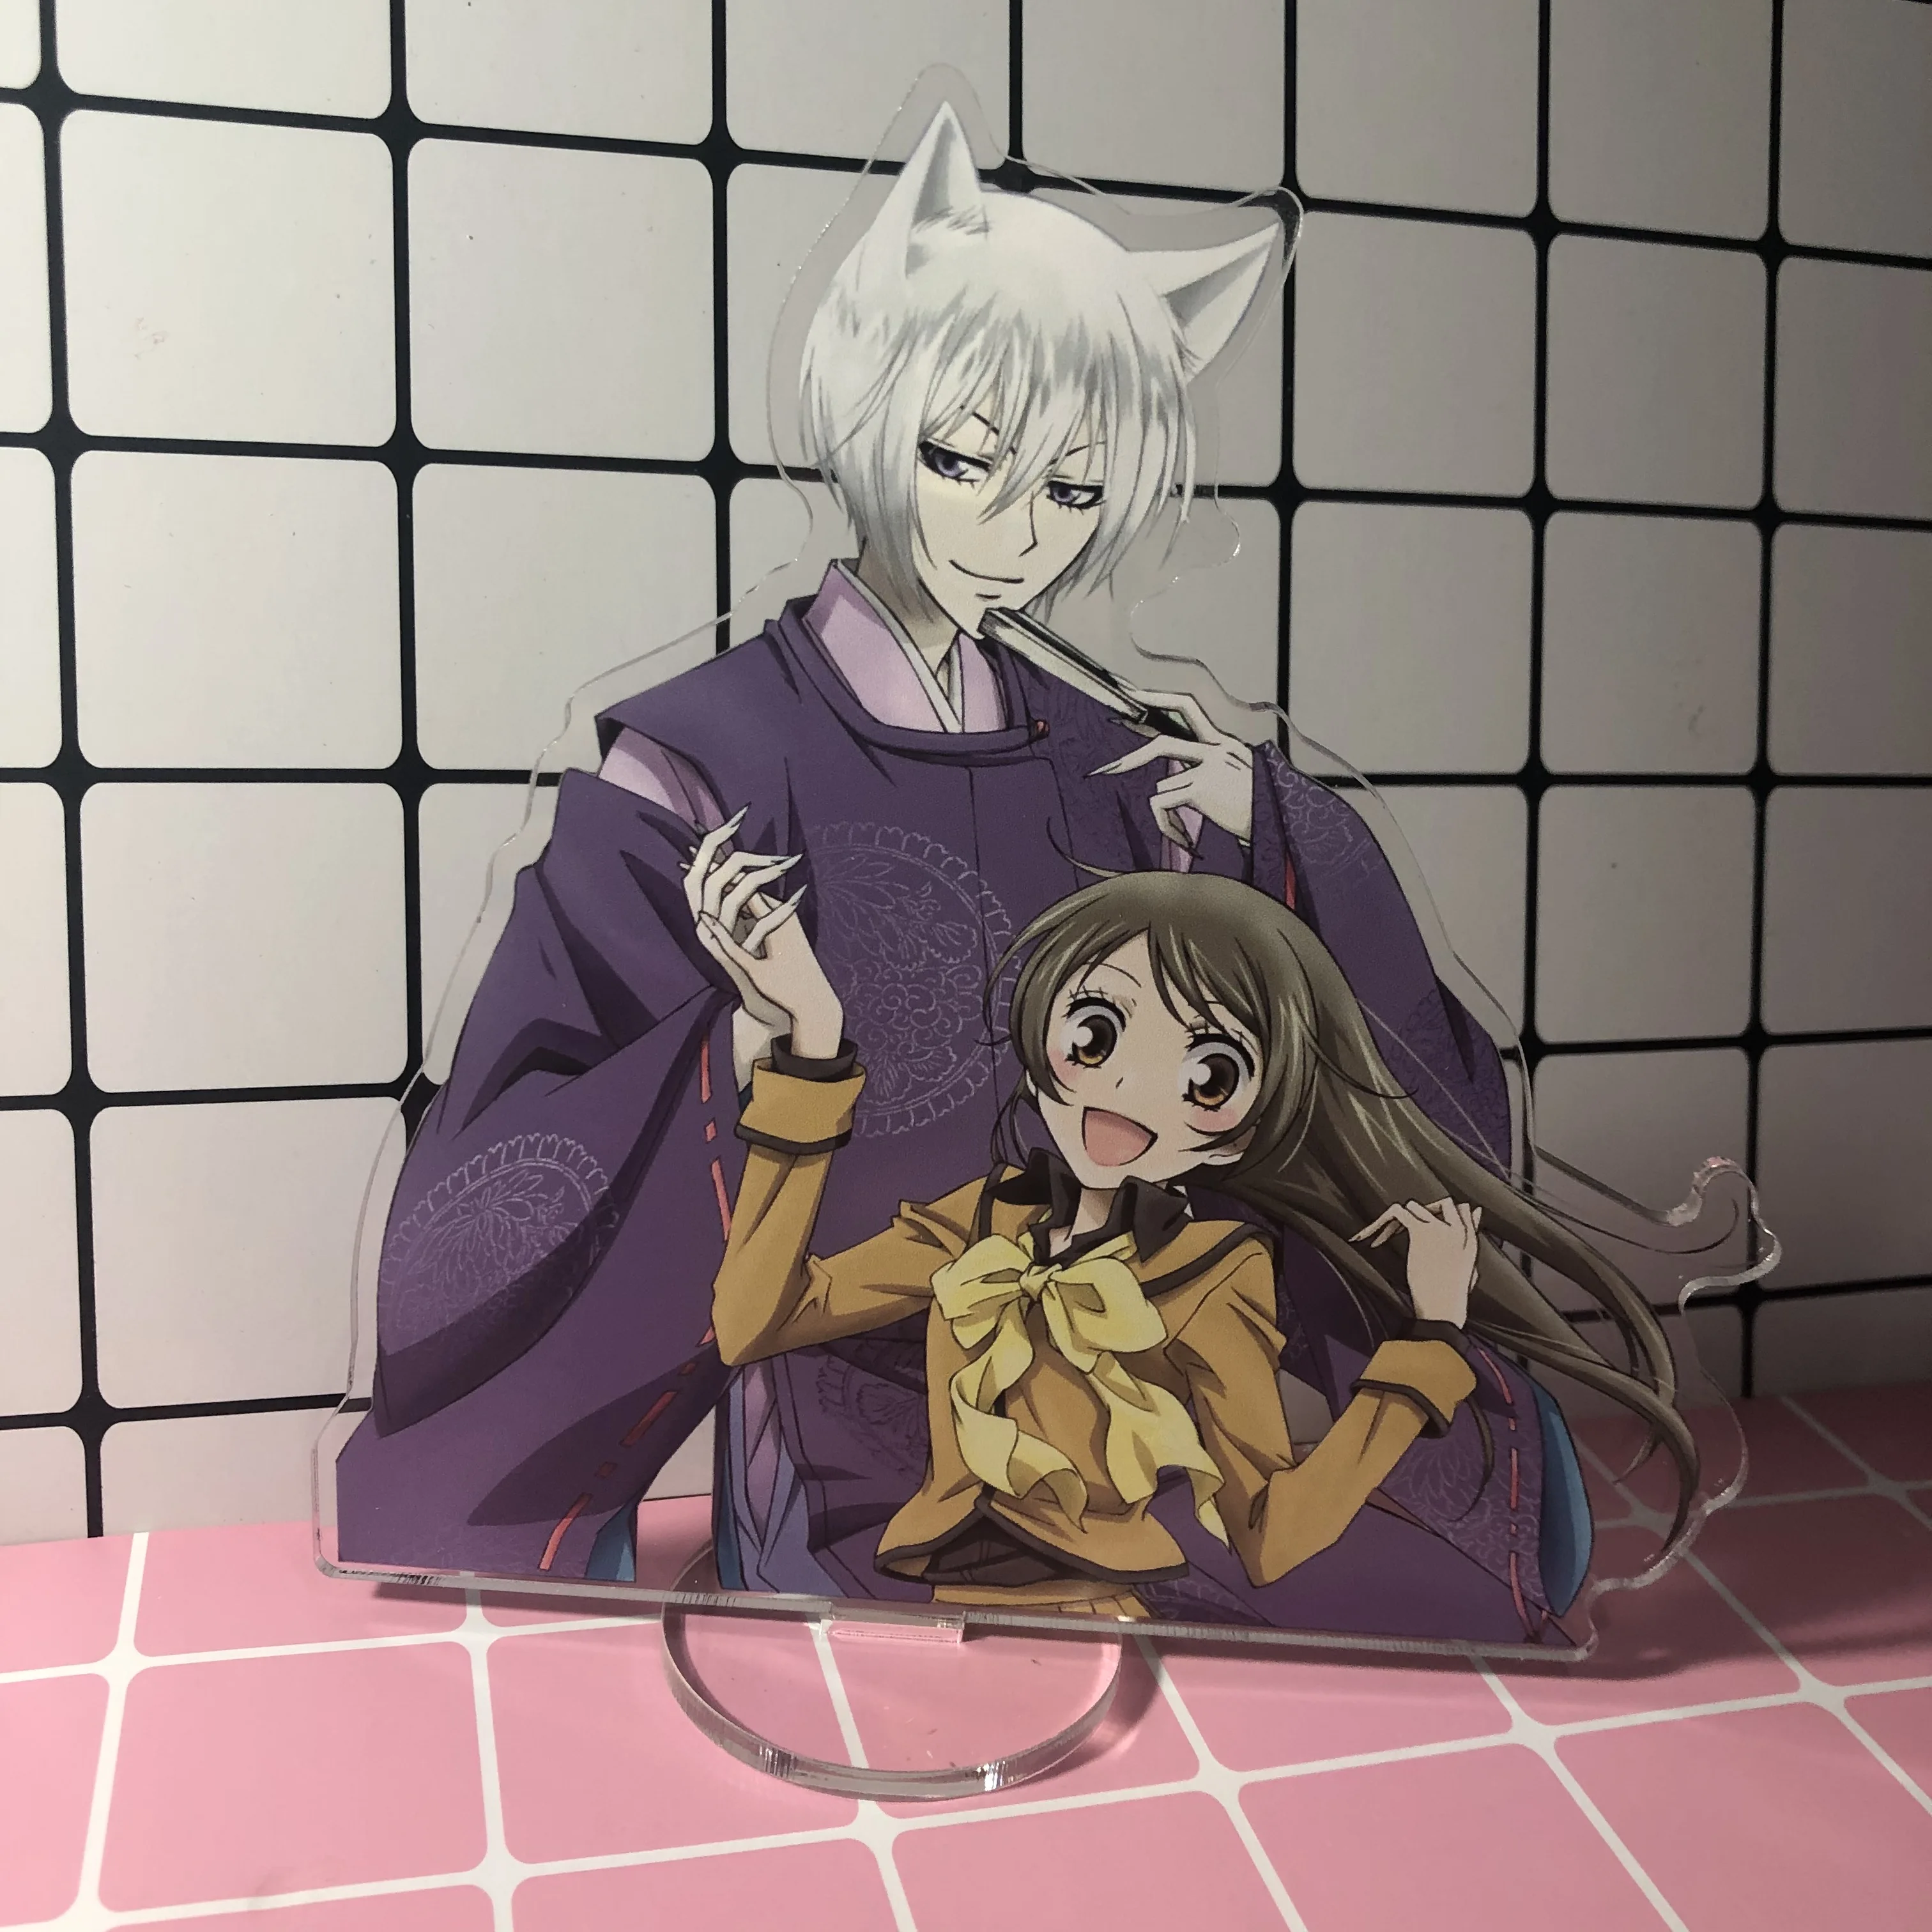 How Old and Tall Is Tomoe from 'Kamisama Kiss?